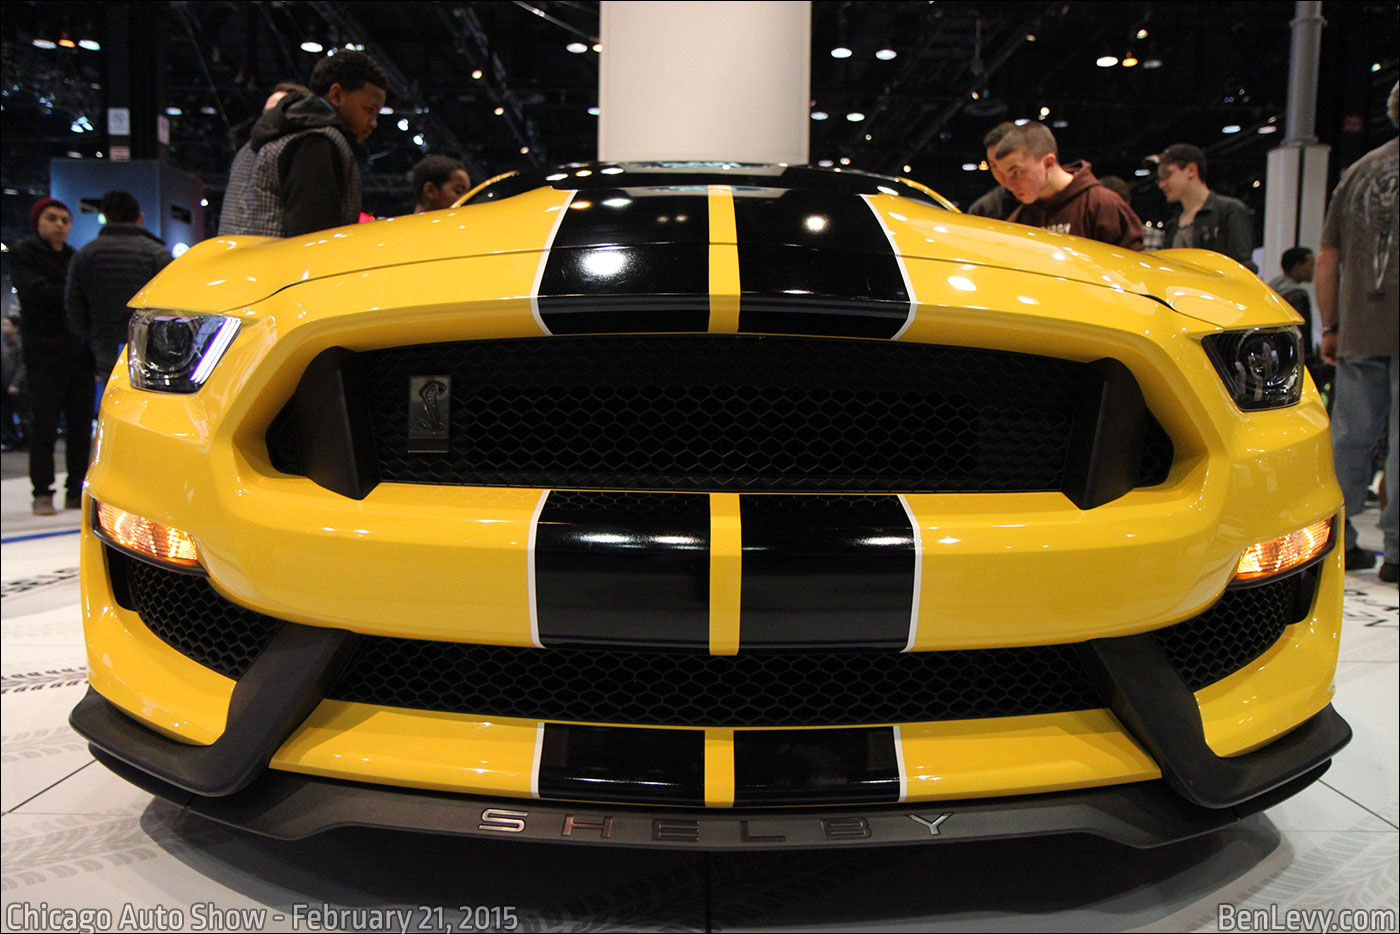 Grille of a Ford Mustang Shelby GT350